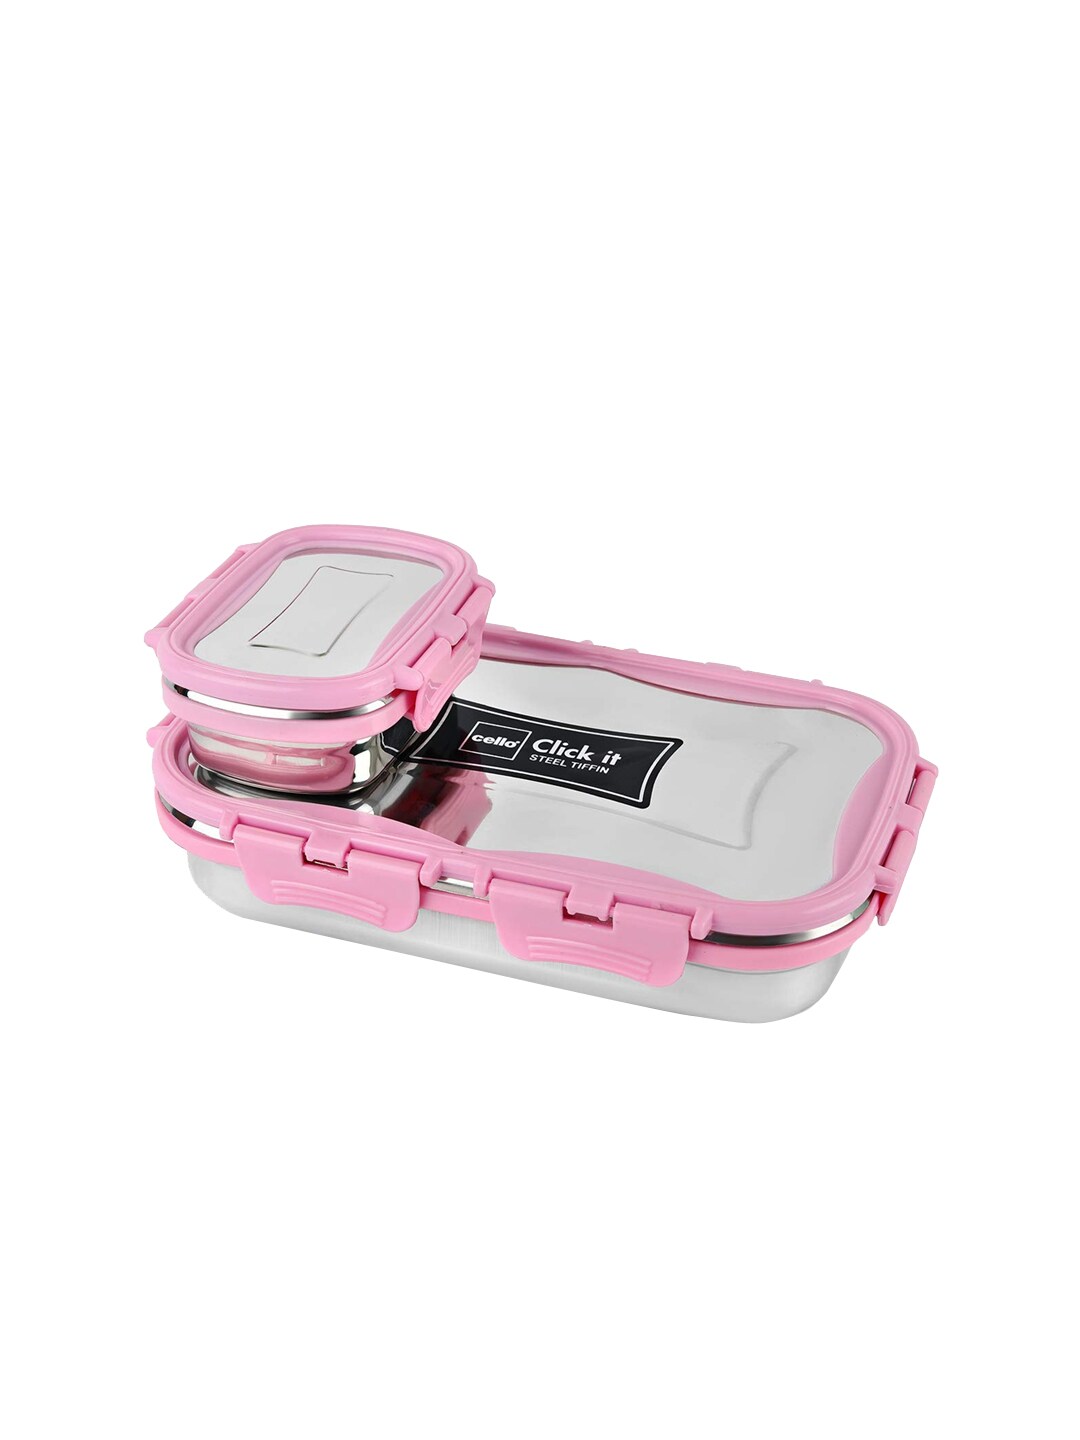 Cello Pink & Steel-Toned Solid Stainless Steel Lunch Box Price in India